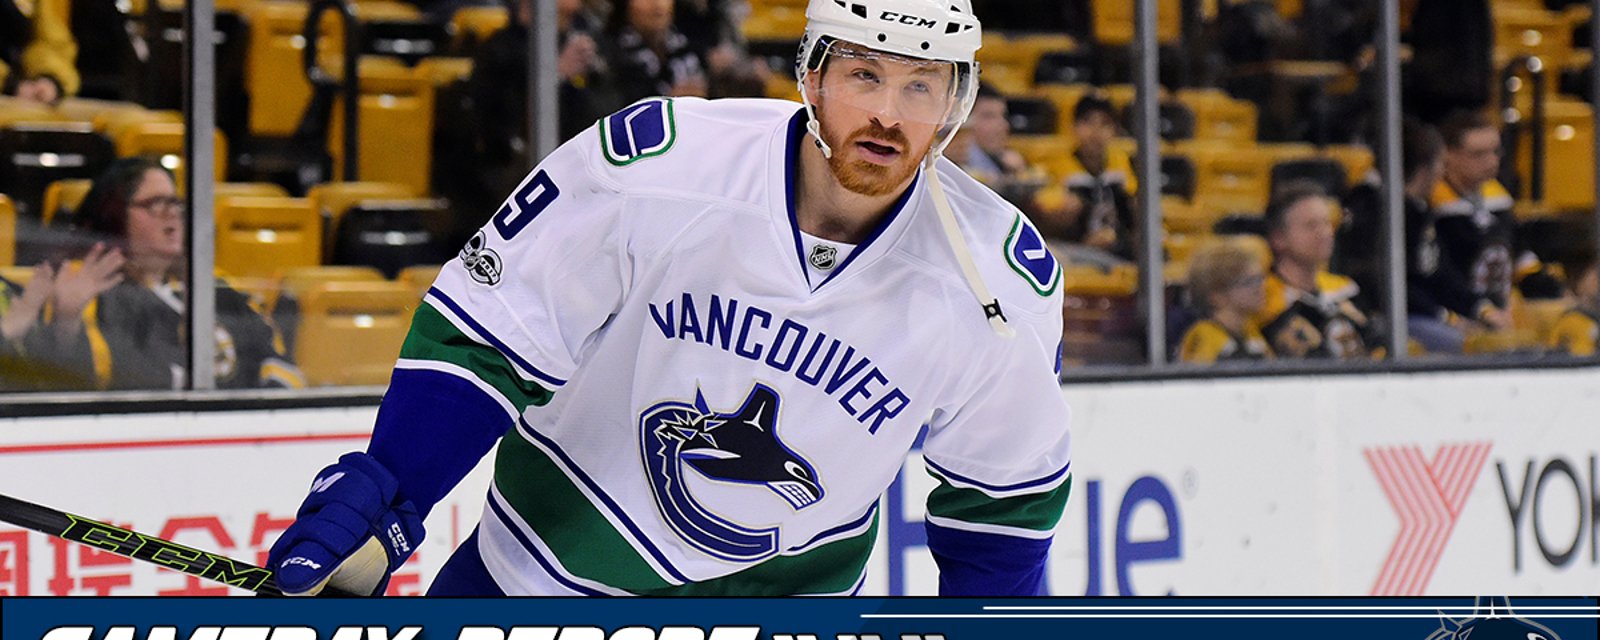 Breaking: Canucks showing a different lineup to the Chicago Blackhawks!